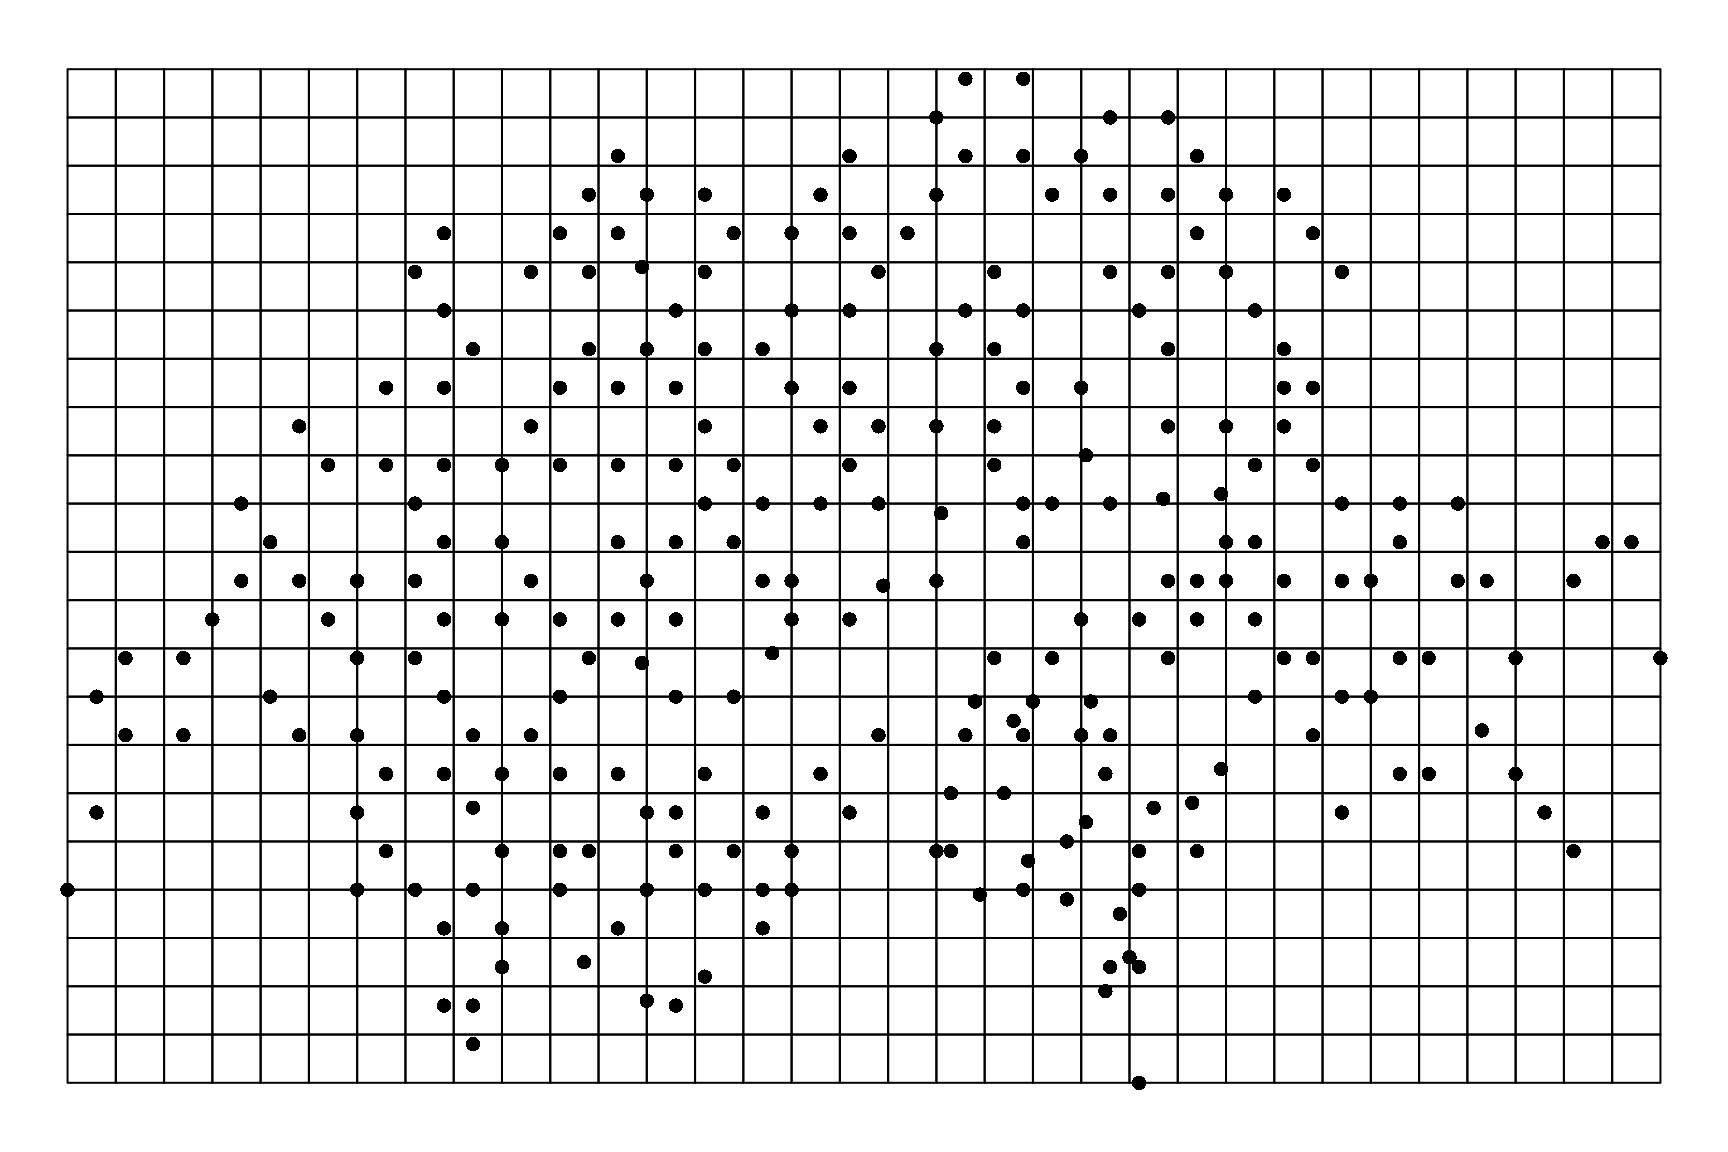 Location of the 264 10 km\(^2\) quadrats of the Swiss national breeding bird survey. Points are located on a grid of 10 km\(^2\) cells. The grid is covering the geographical extent of the observation points.